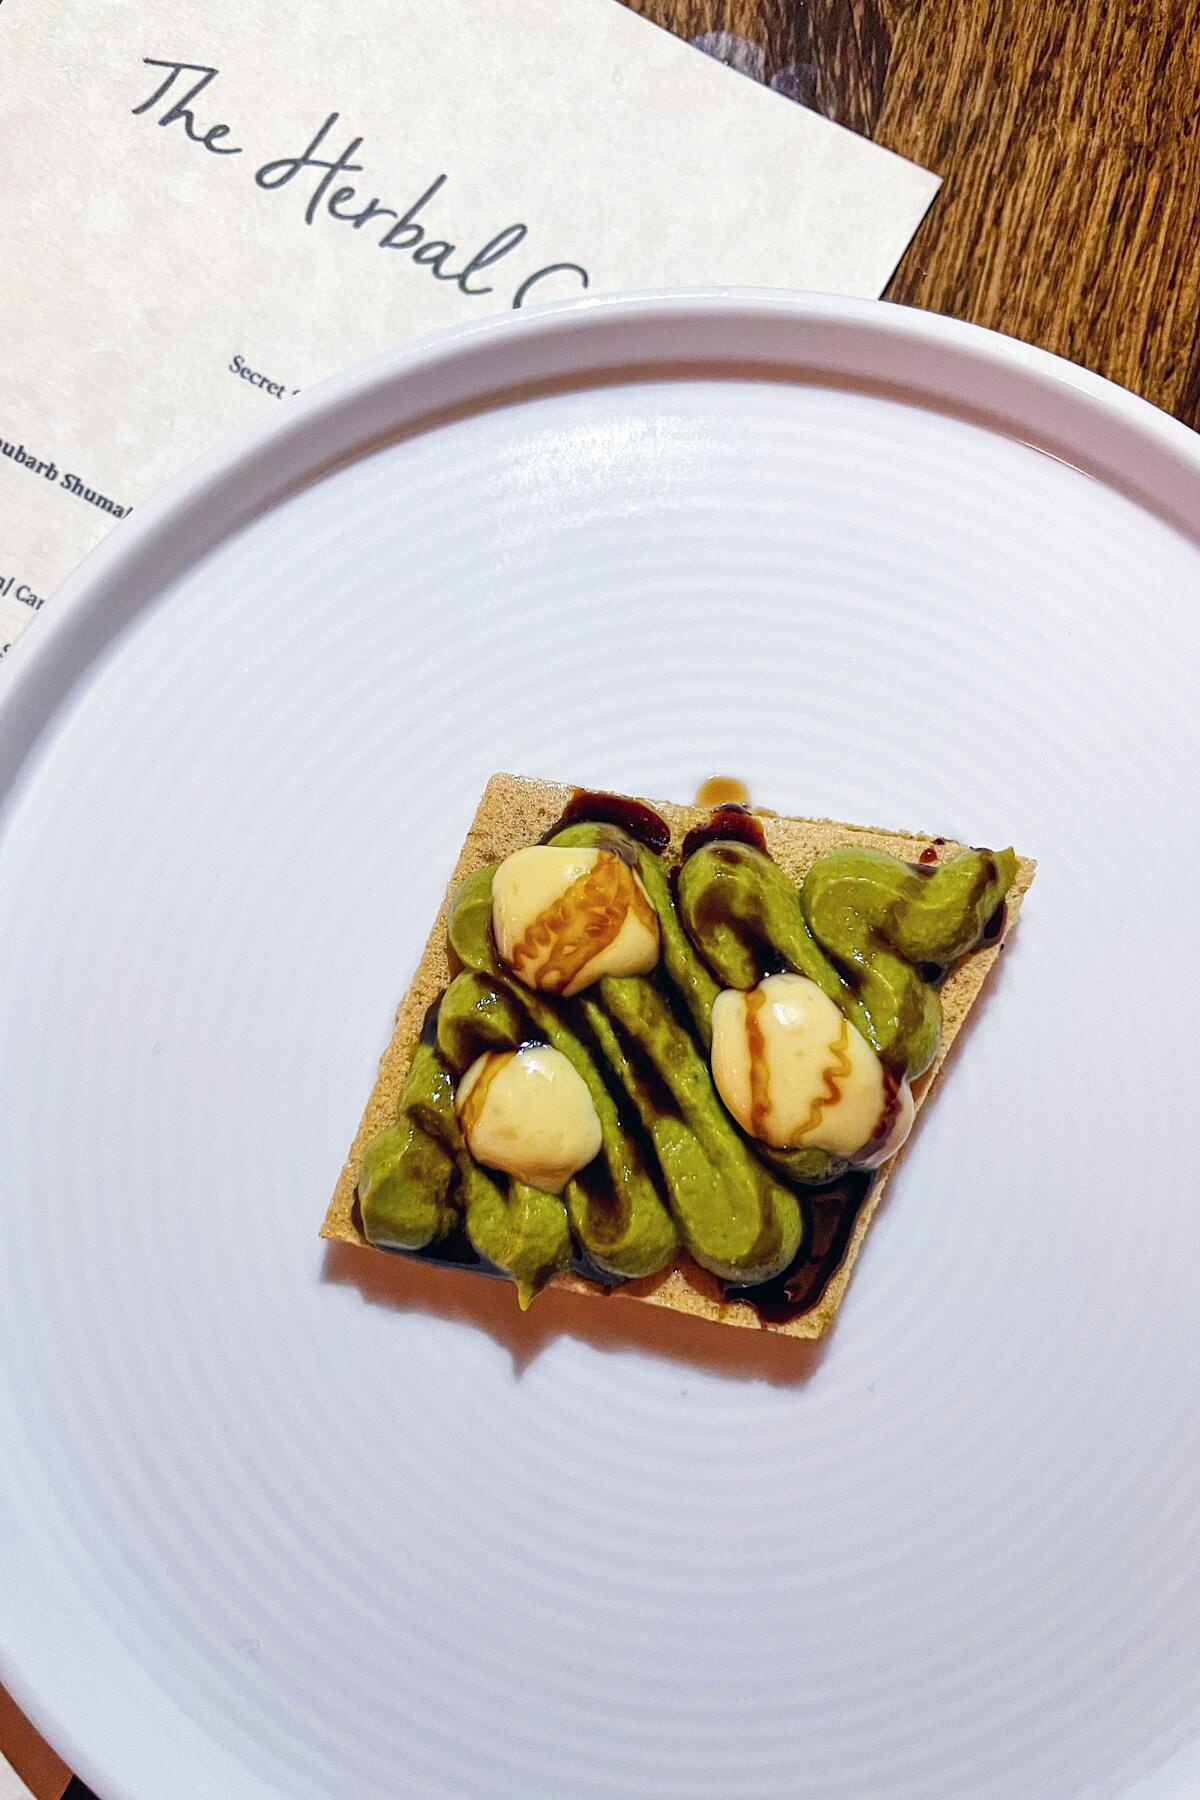 A round plate containing a square cracker topped with leeks and foie gras.